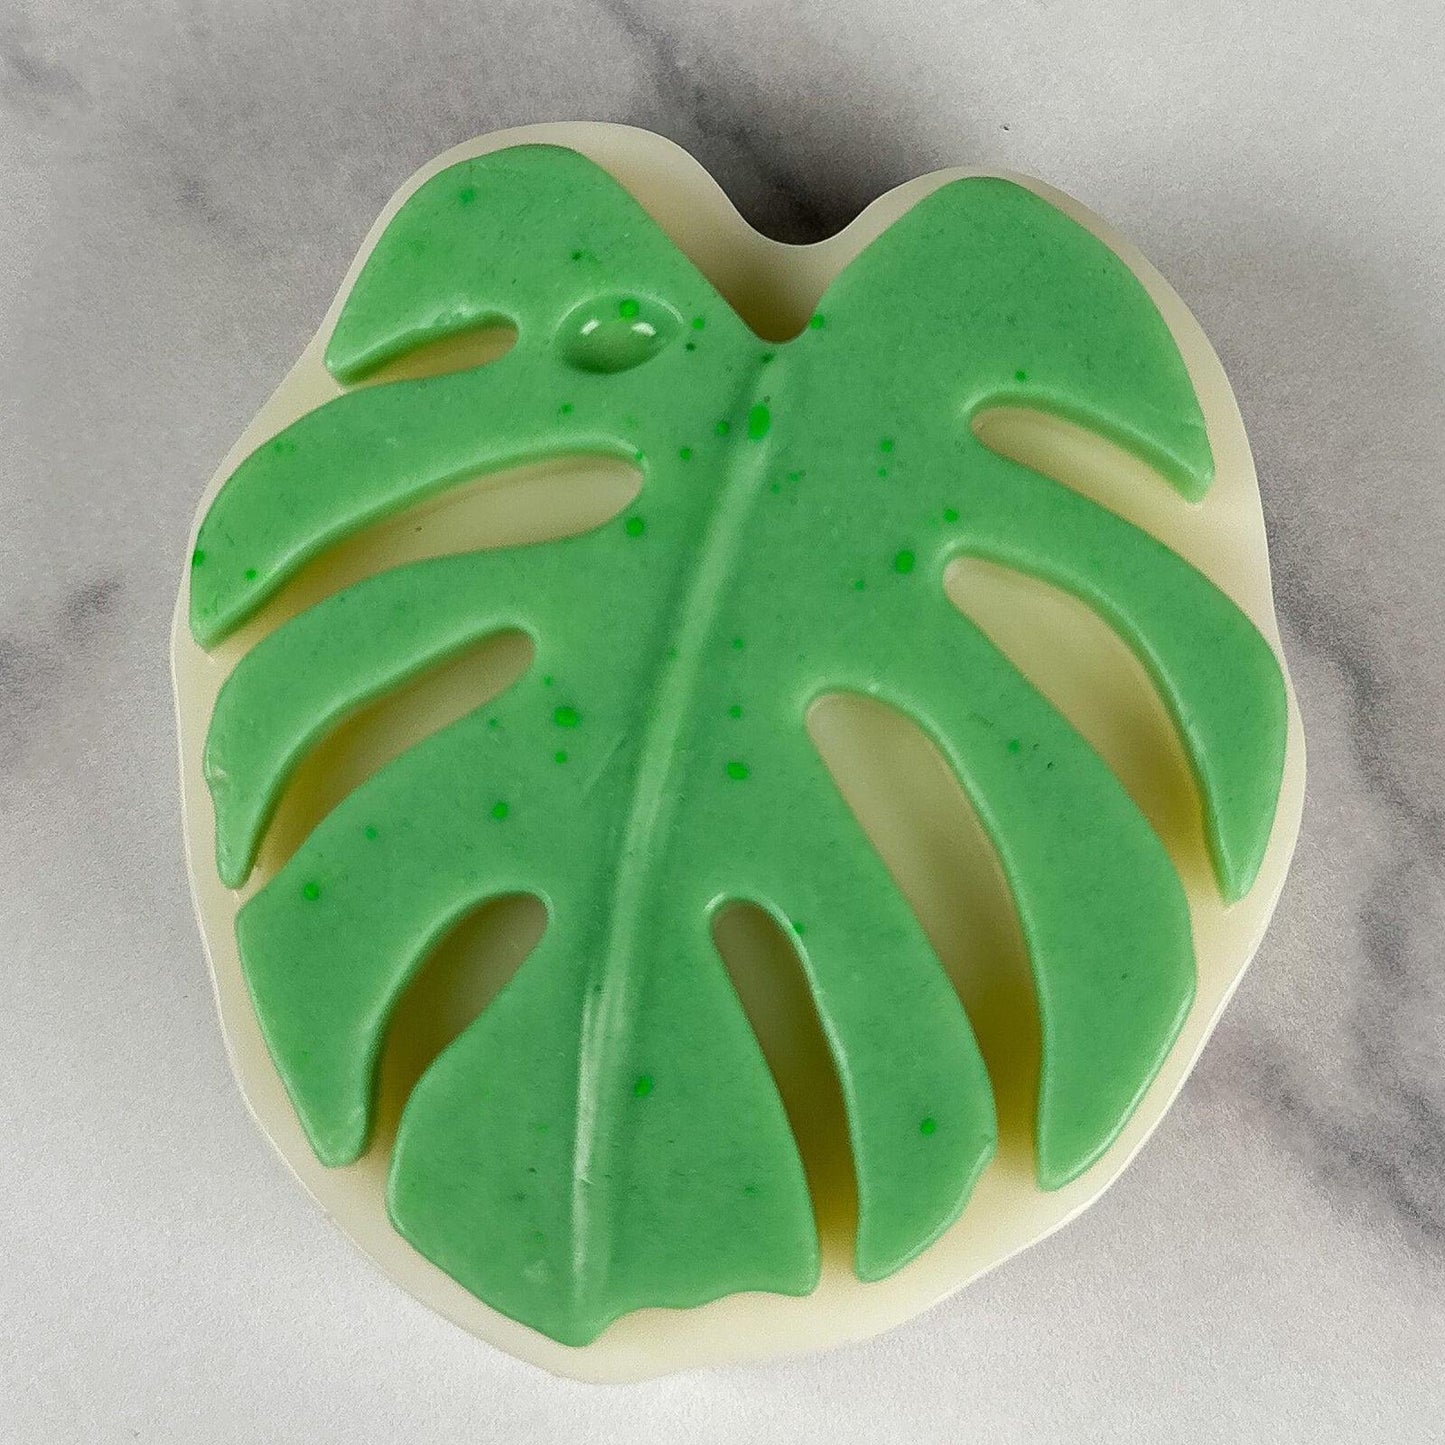 Monstera Soap - The Serpentry